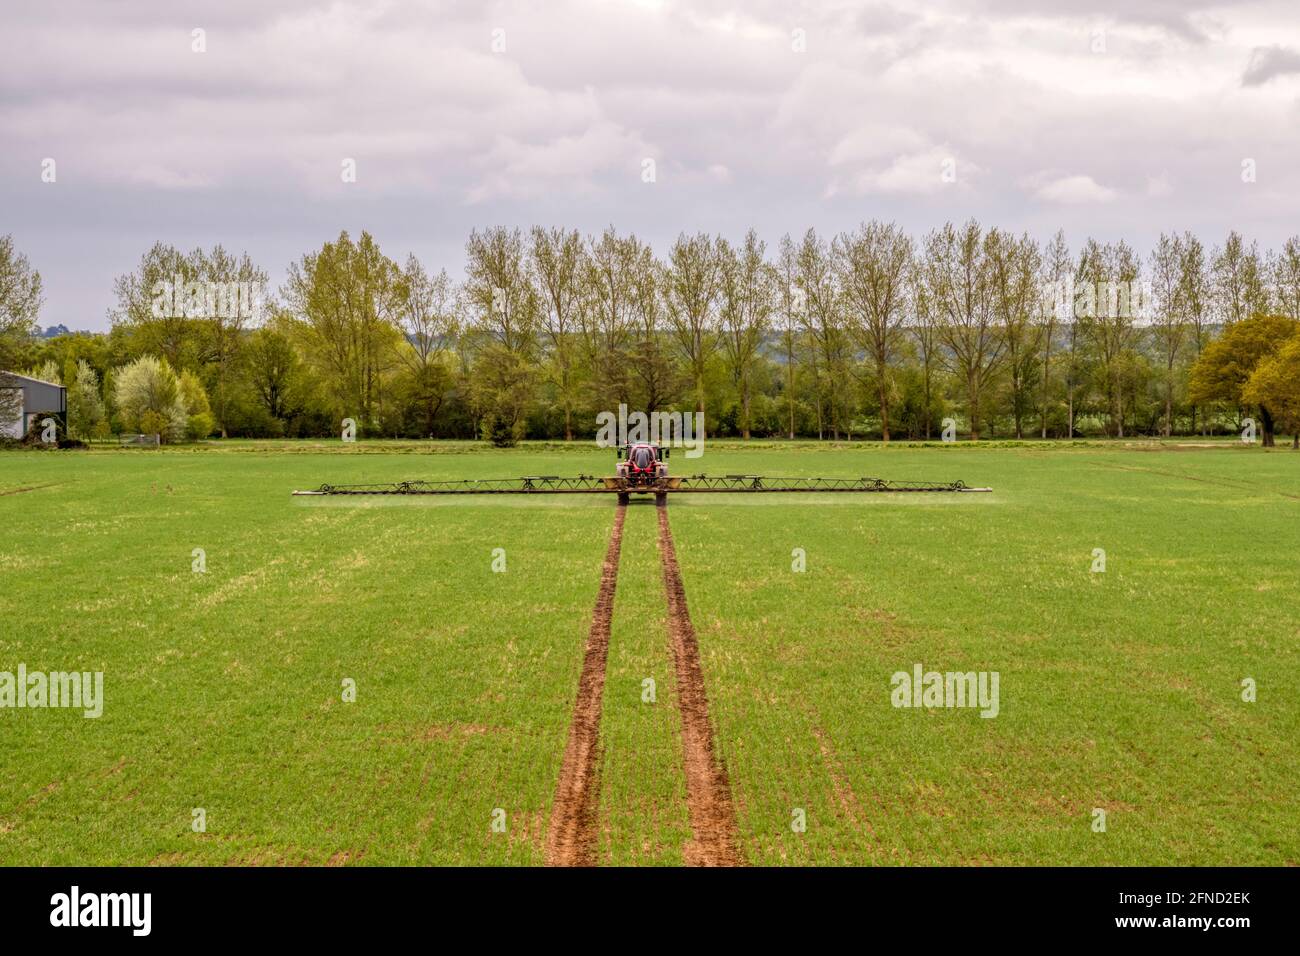 A Horsch agricultural sprayer working on an arable field in Norfolk. Stock Photo